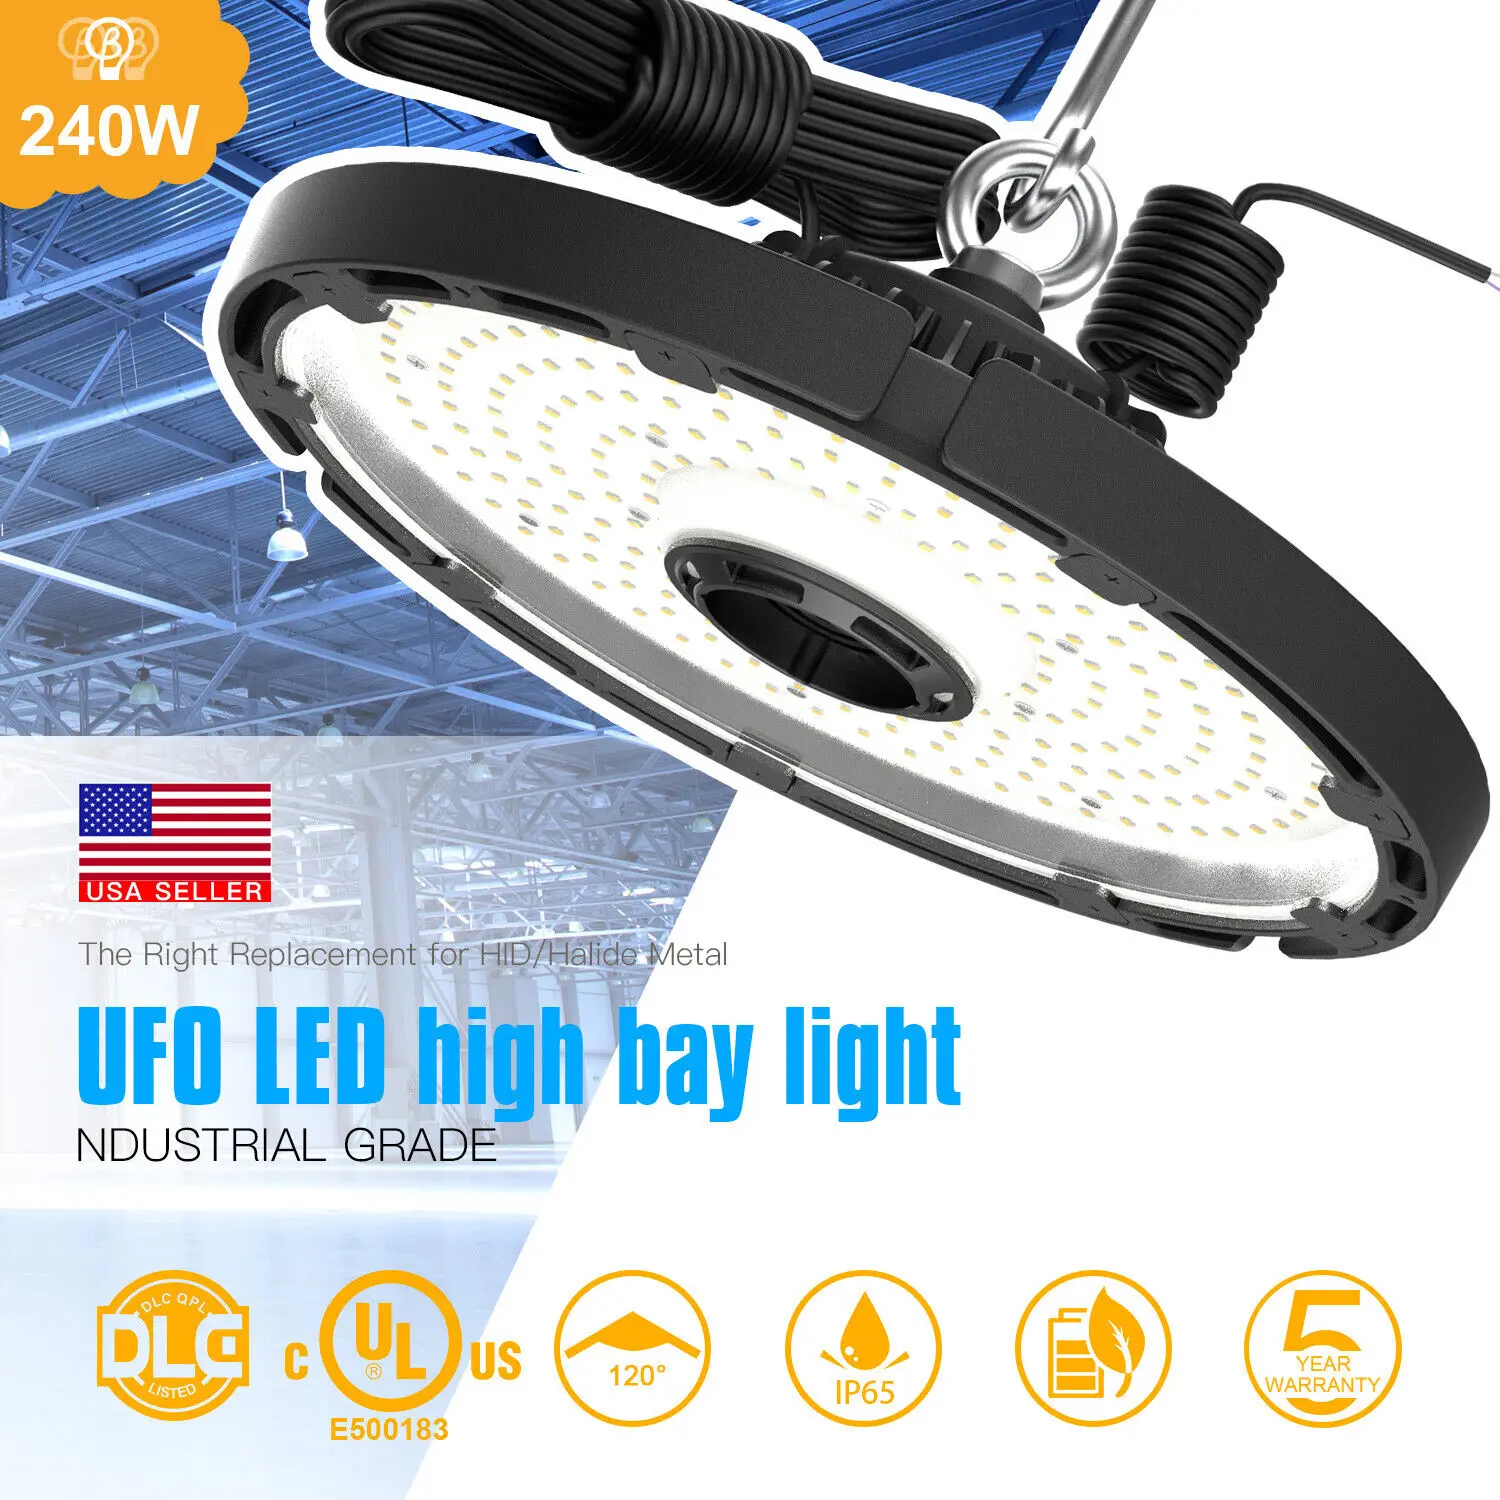 LED High Bay Light 240W UFO 5000K 36,000LM,0-10V Dimmable,1000W HID/HPS Replacement,UL 6-Foot Cable Shop Light,Garage, Warehouse